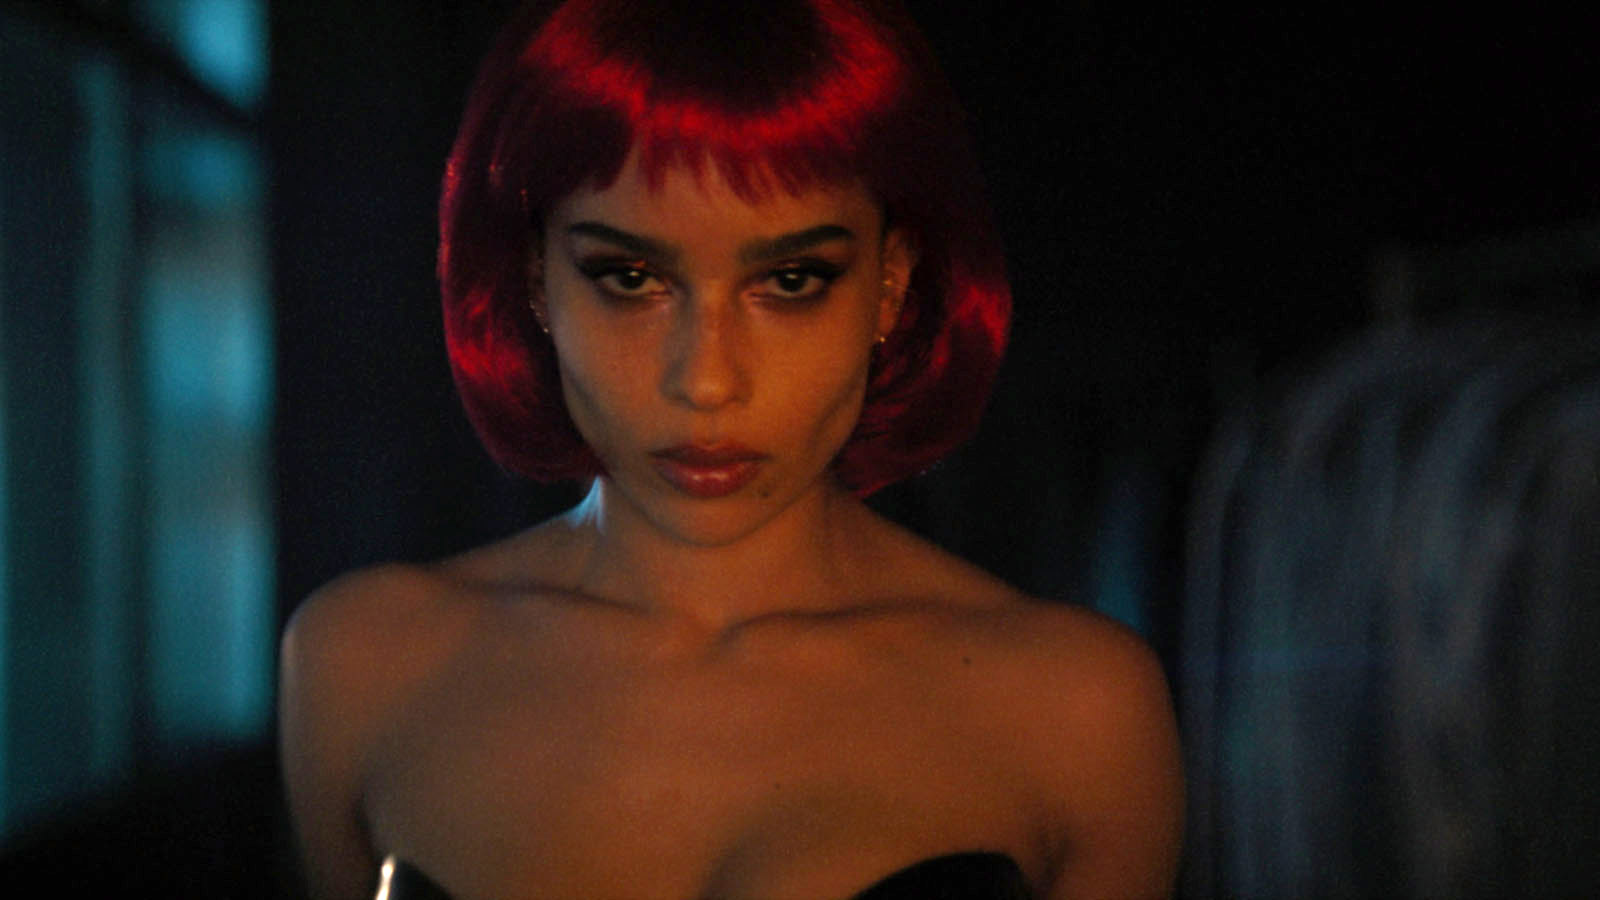 Catwoman/Selina Kyle (played by Zoe Kravitz) in the club scene. Image © Warner Bros.